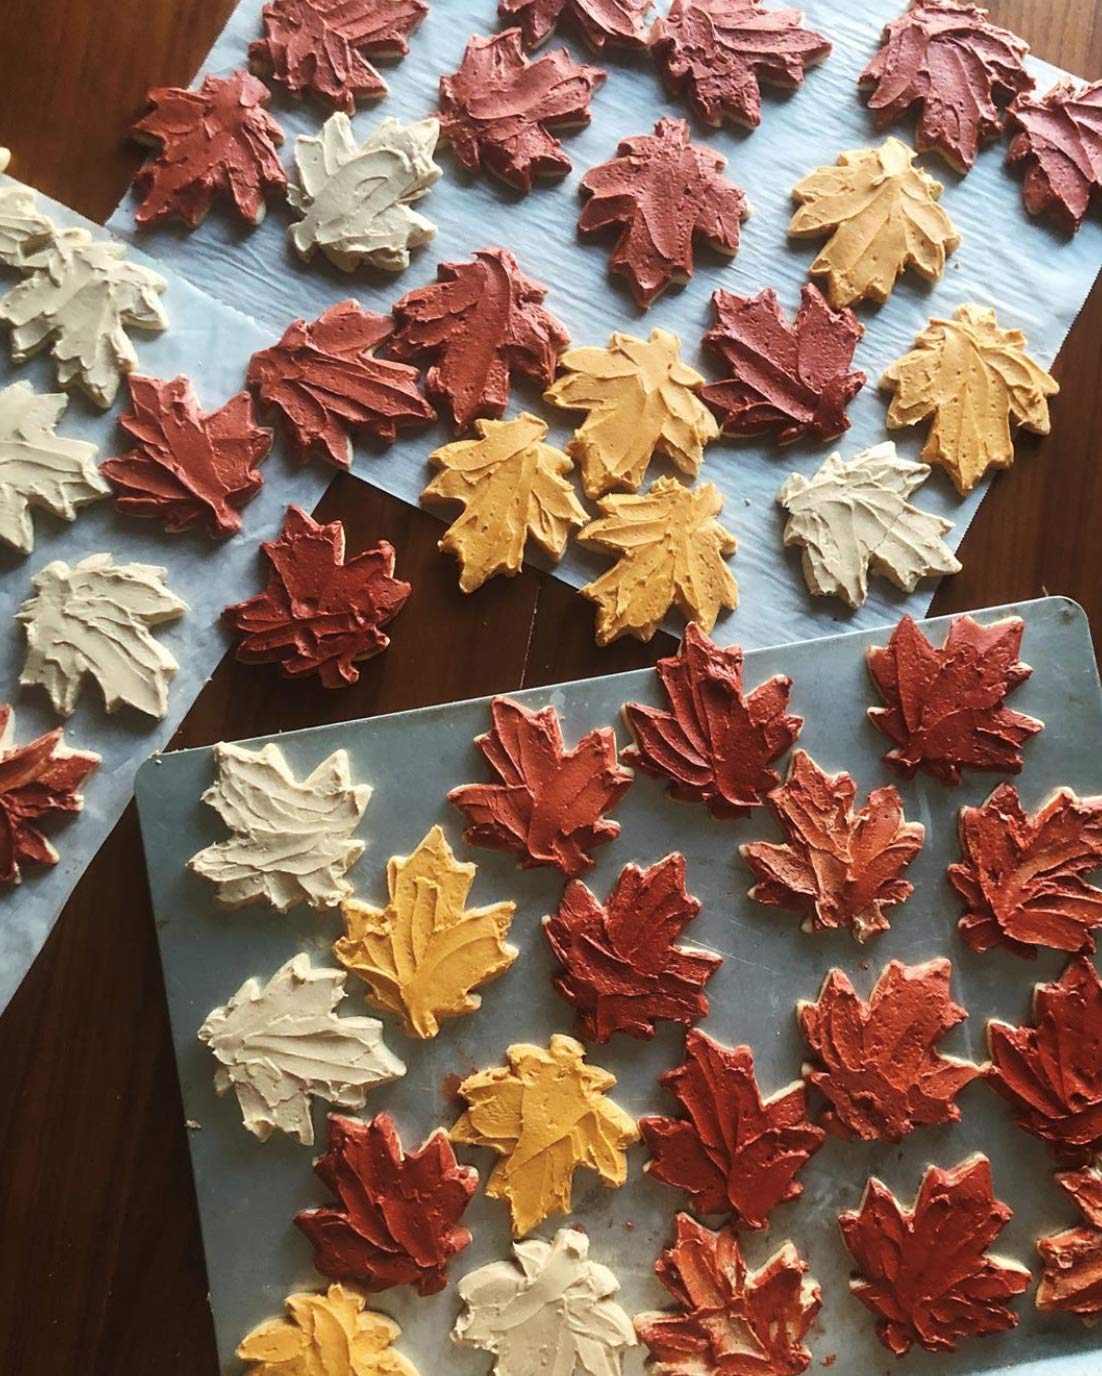 Large Maple Leaf Cookie Cutter, 4" Made in USA by Ann Clark